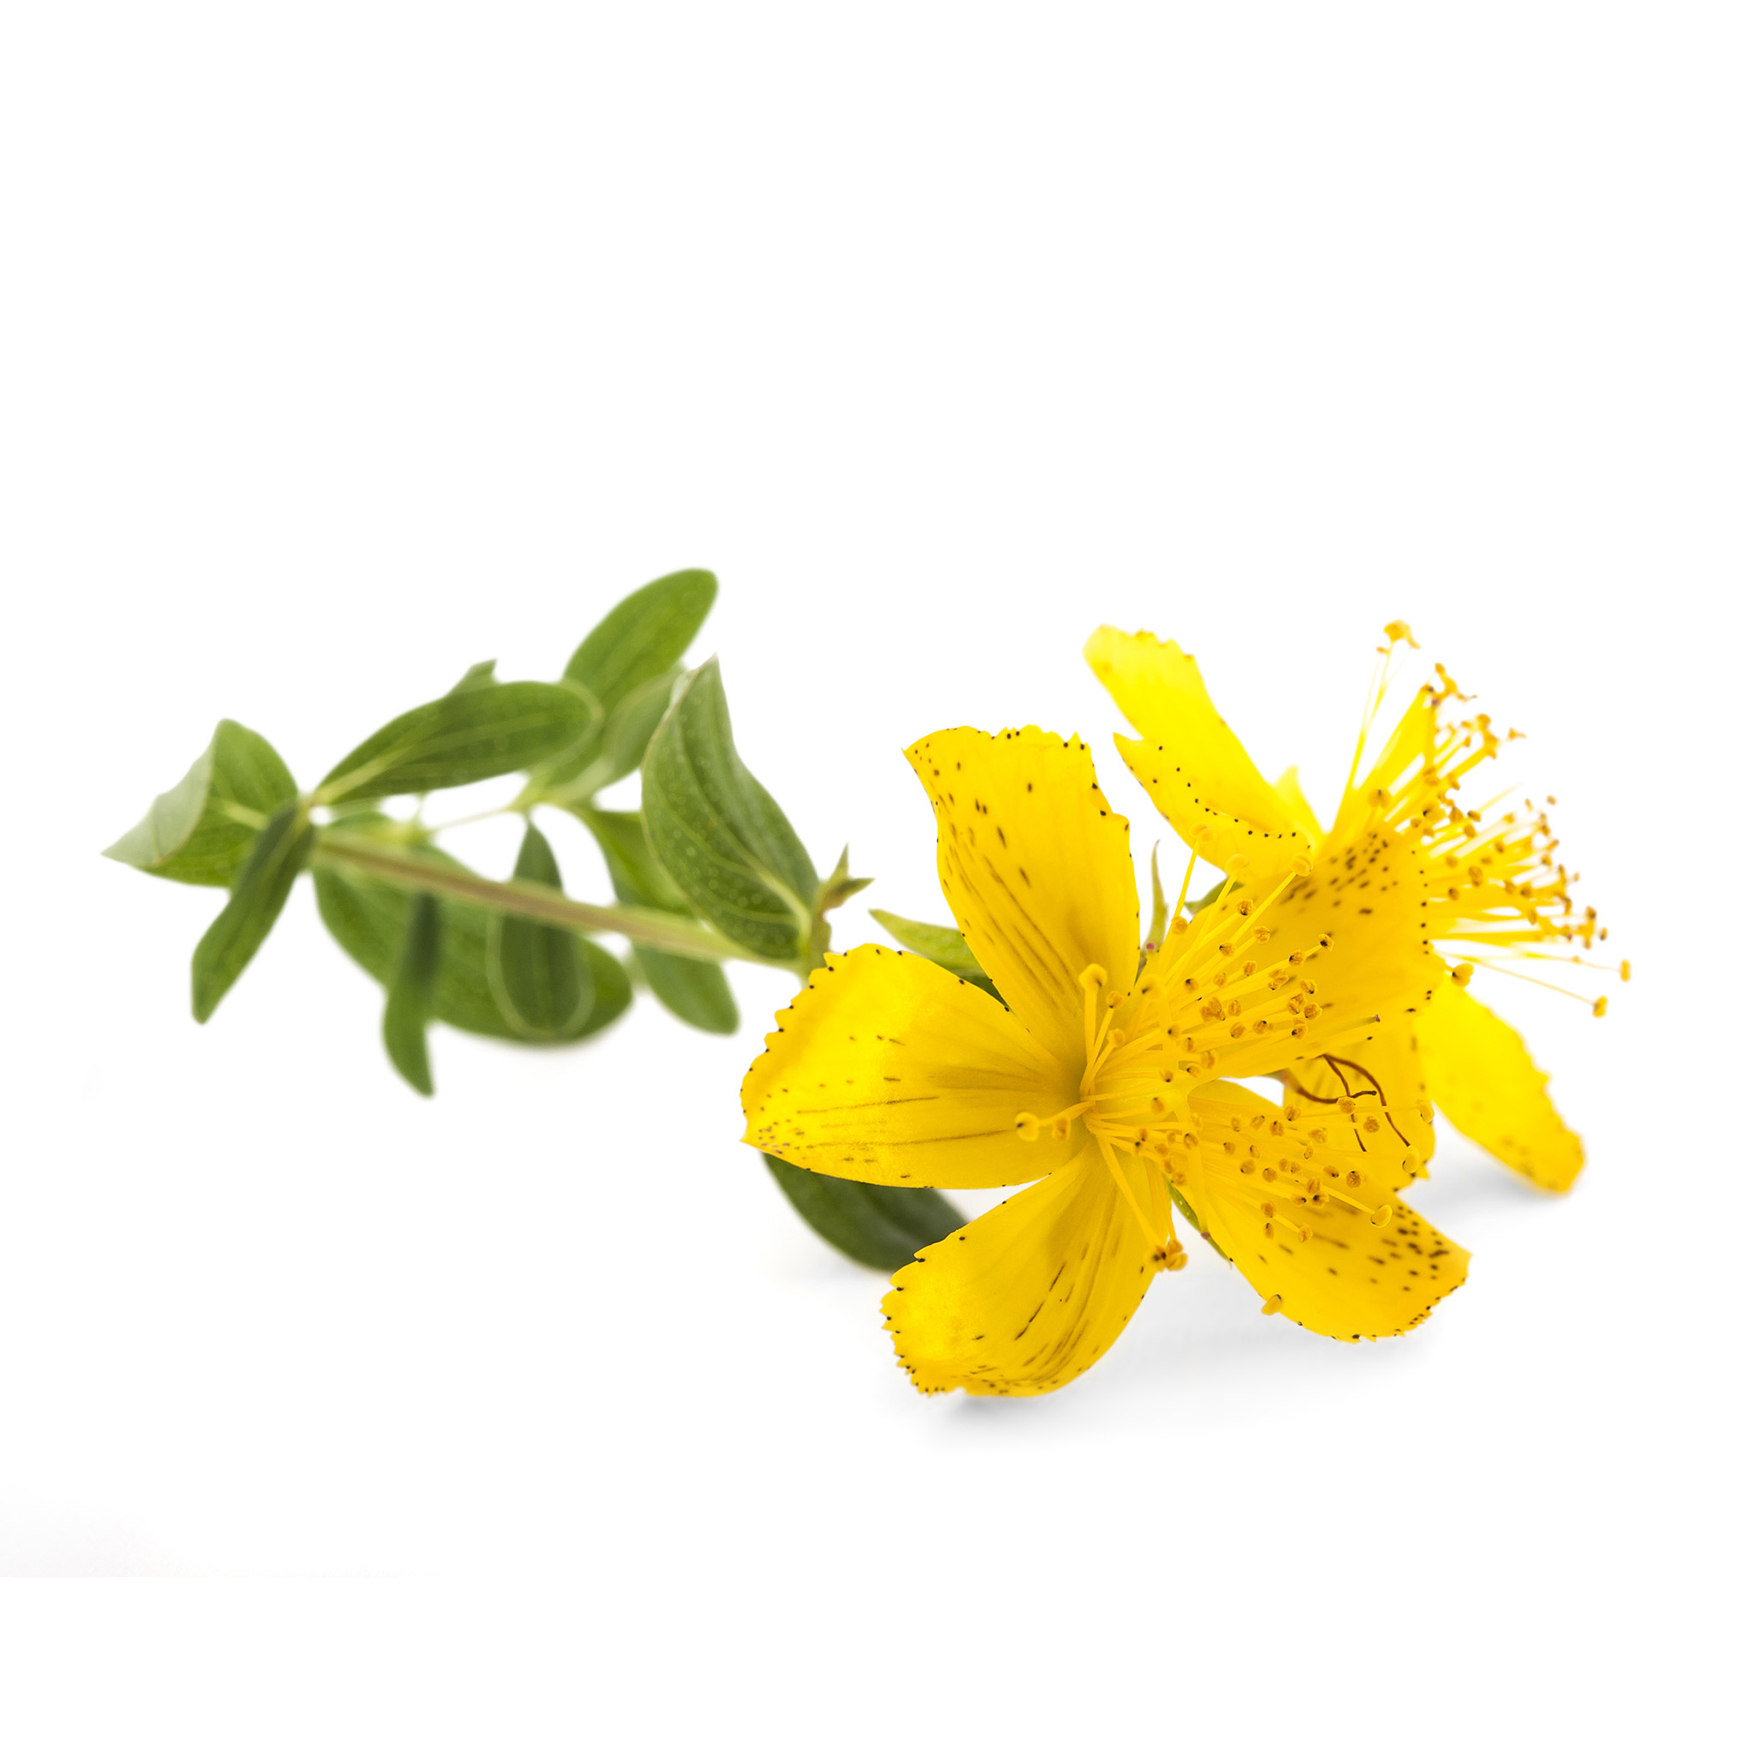 St. John's Wort has been used historically to exorcise evil spirits and remove melancholia. It is still prescribed today as an anti-depressant - boosting interest and self-esteem.